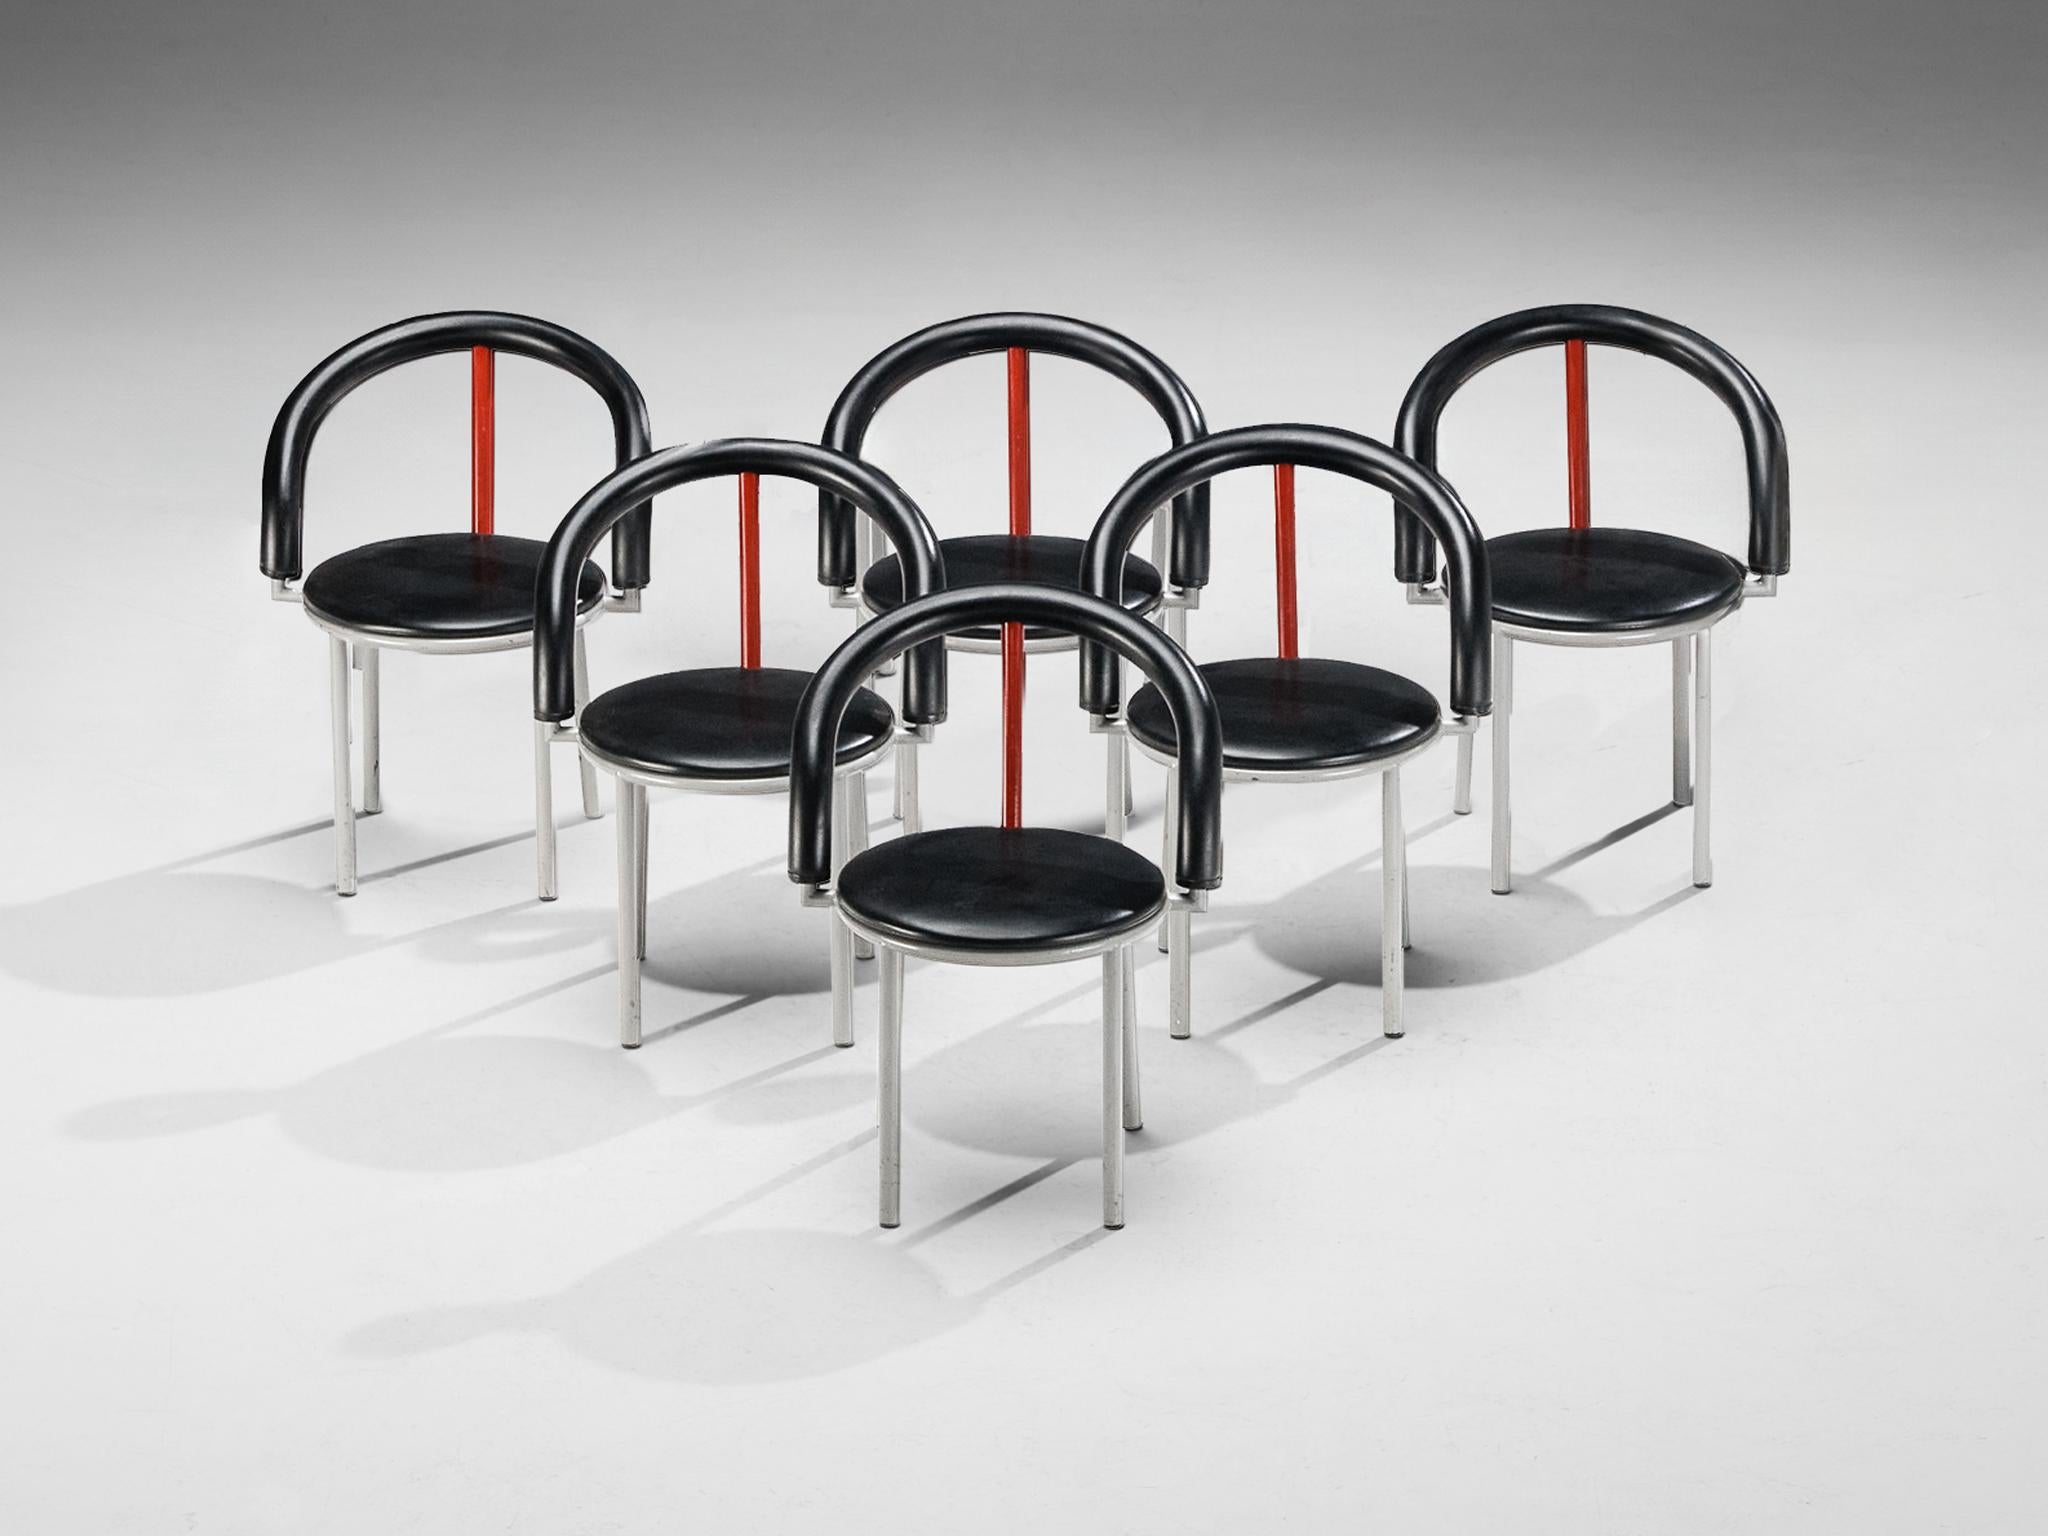 Anna Anselmi for Bieffeplast, set of  six 'Alpha' dining chairs, rubber, lacquered metal, Italy, 1985

These armchairs are characterized by an unusual aesthetics that are created during the postmodern era in Italy. The backrest smoothly runs over